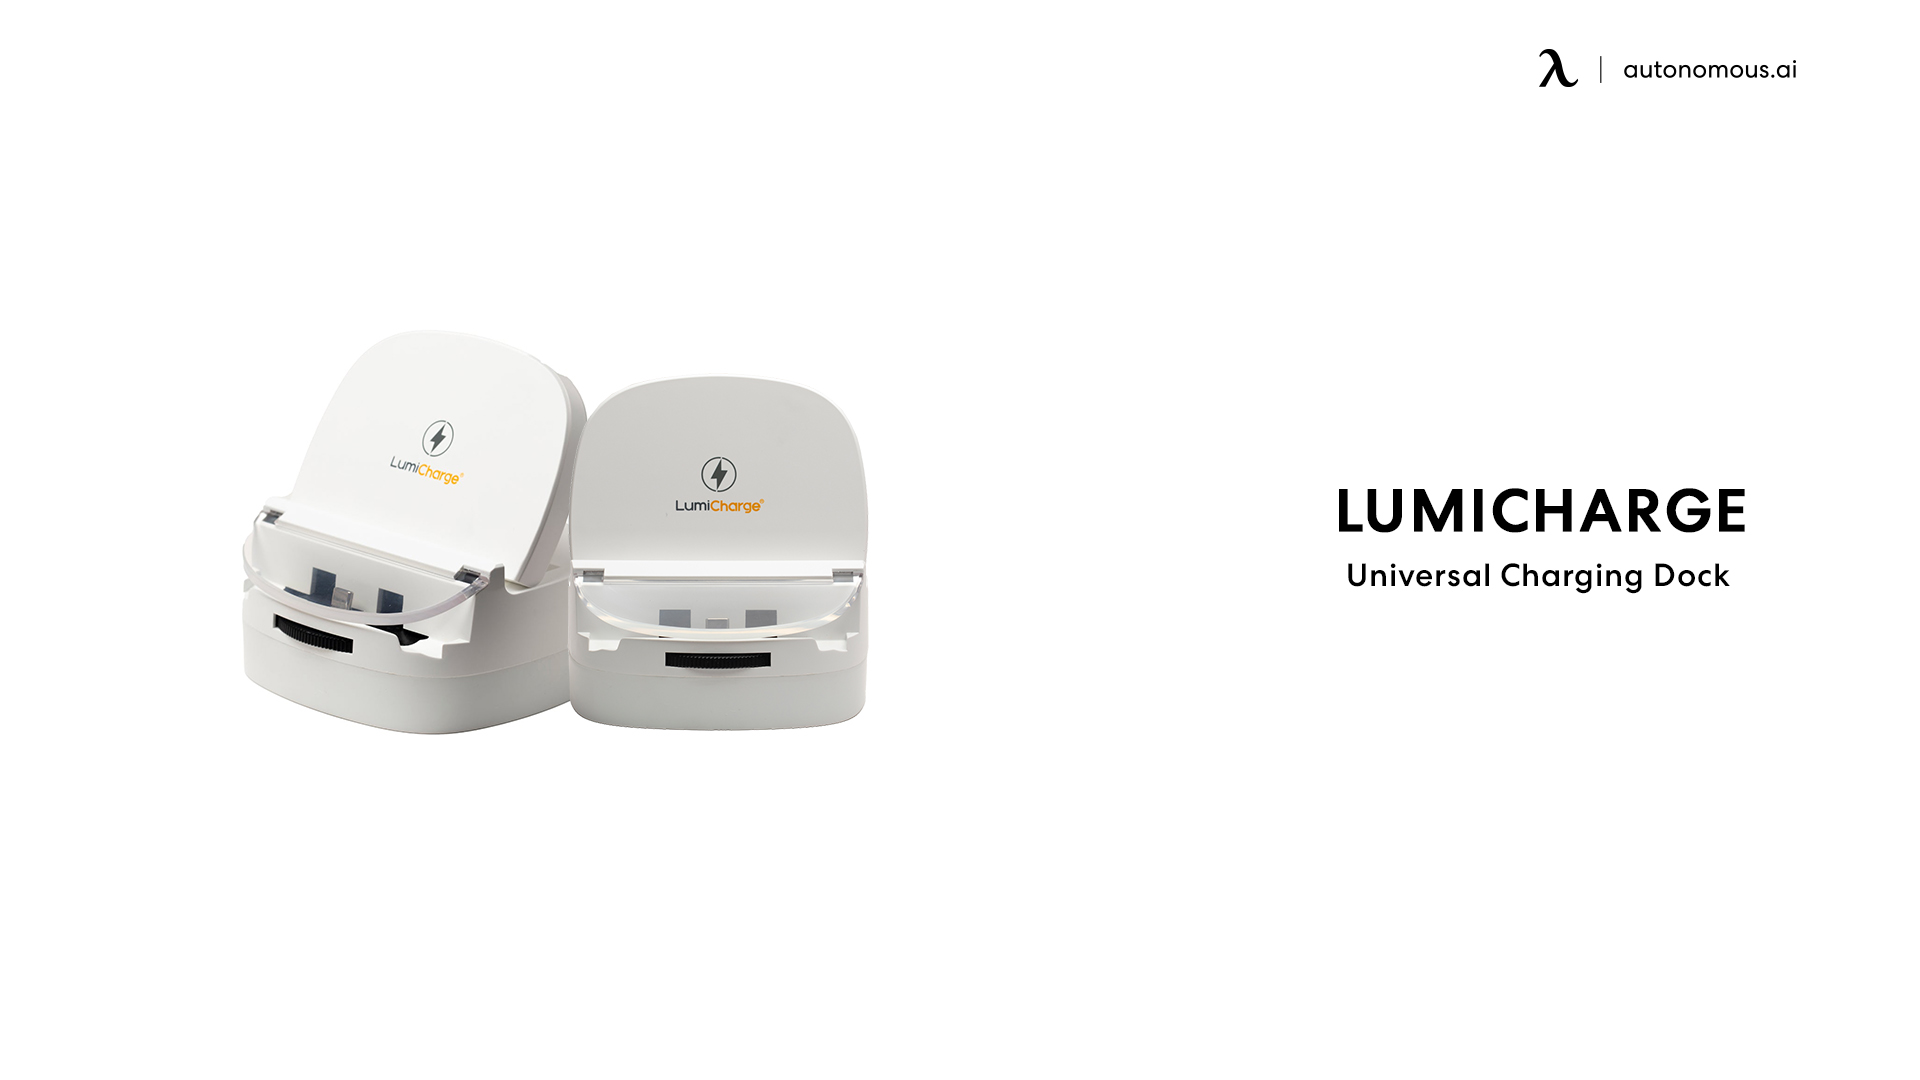 Universal Charging Dock by LumiCharge